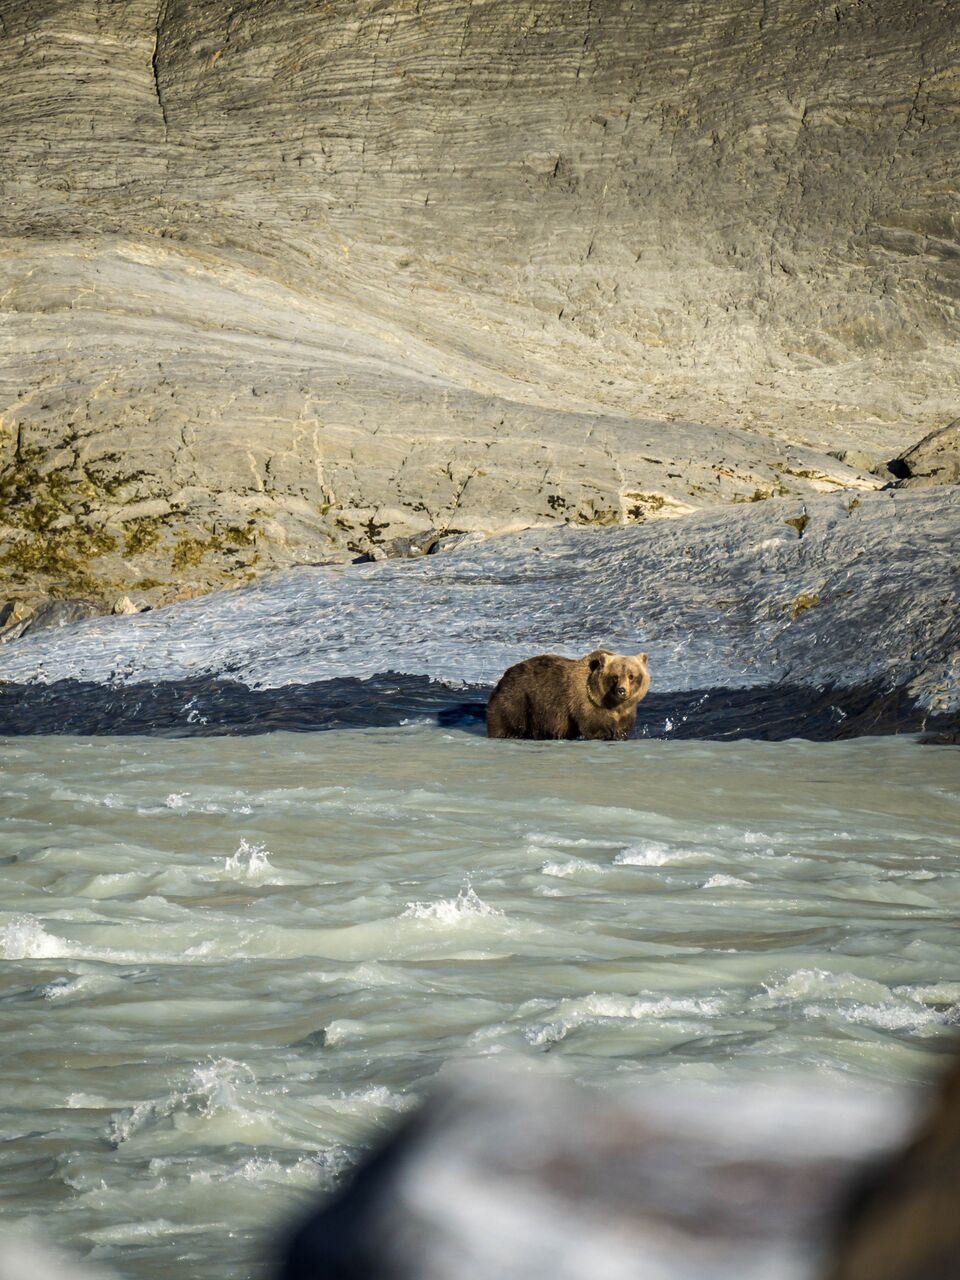 grizzly bear in the water near river's edge